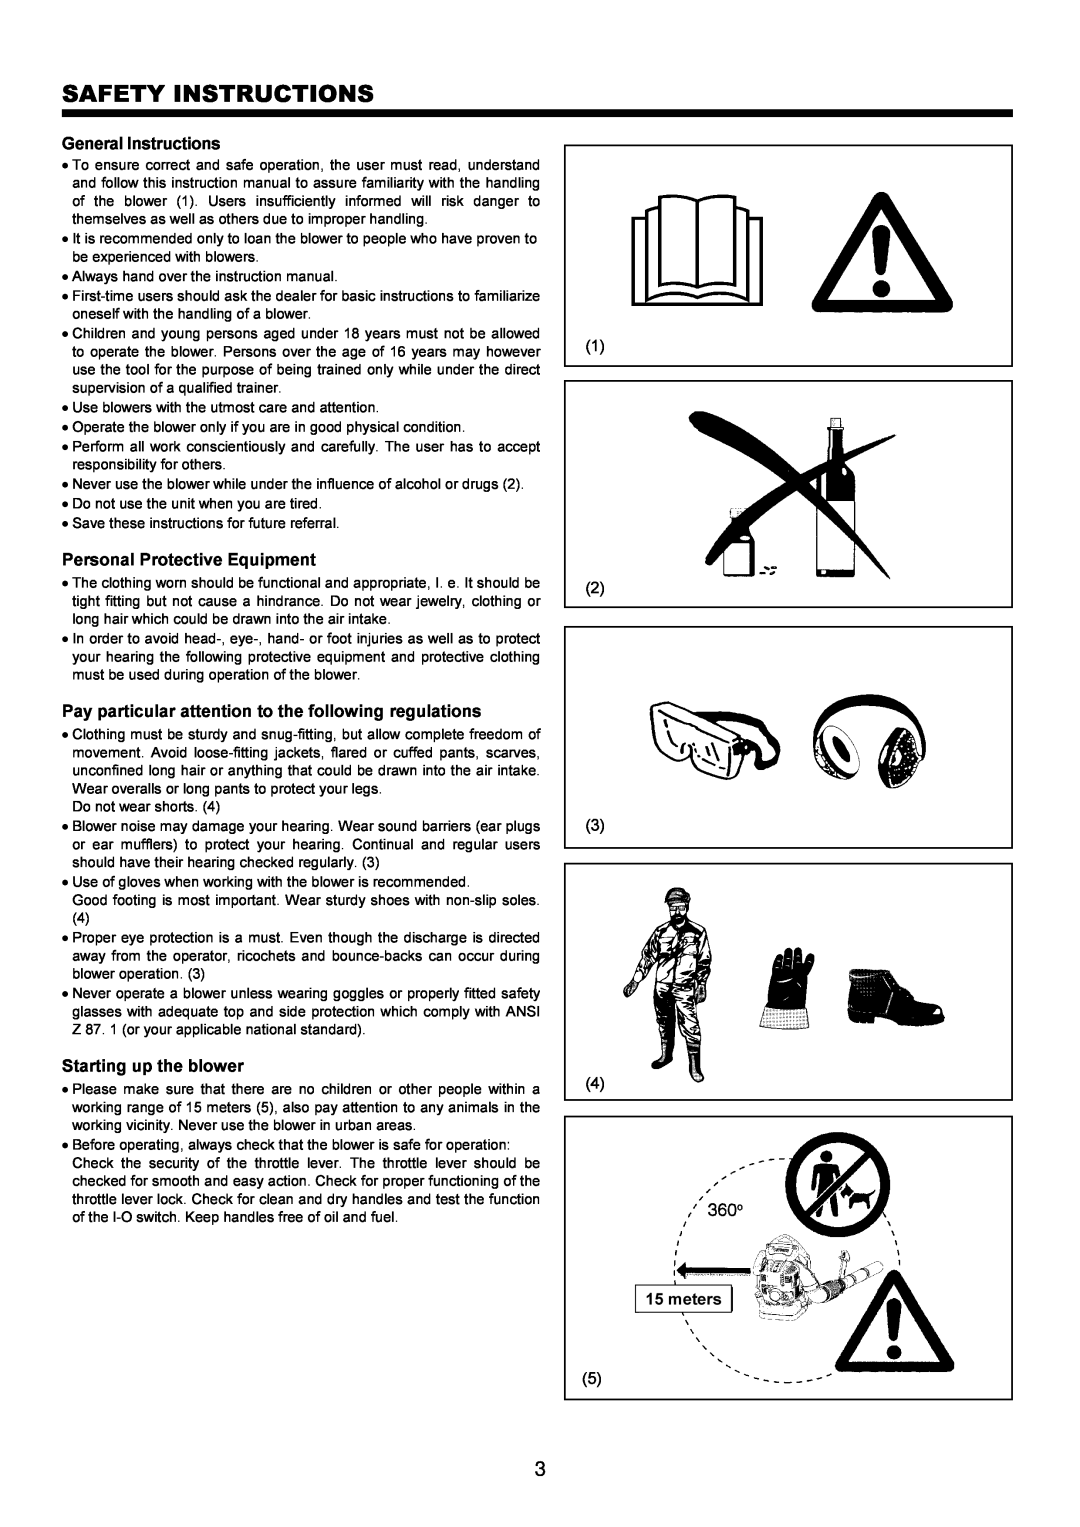 Makita BBX7600CA Safety Instructions, General Instructions, Personal Protective Equipment, Starting up the blower 